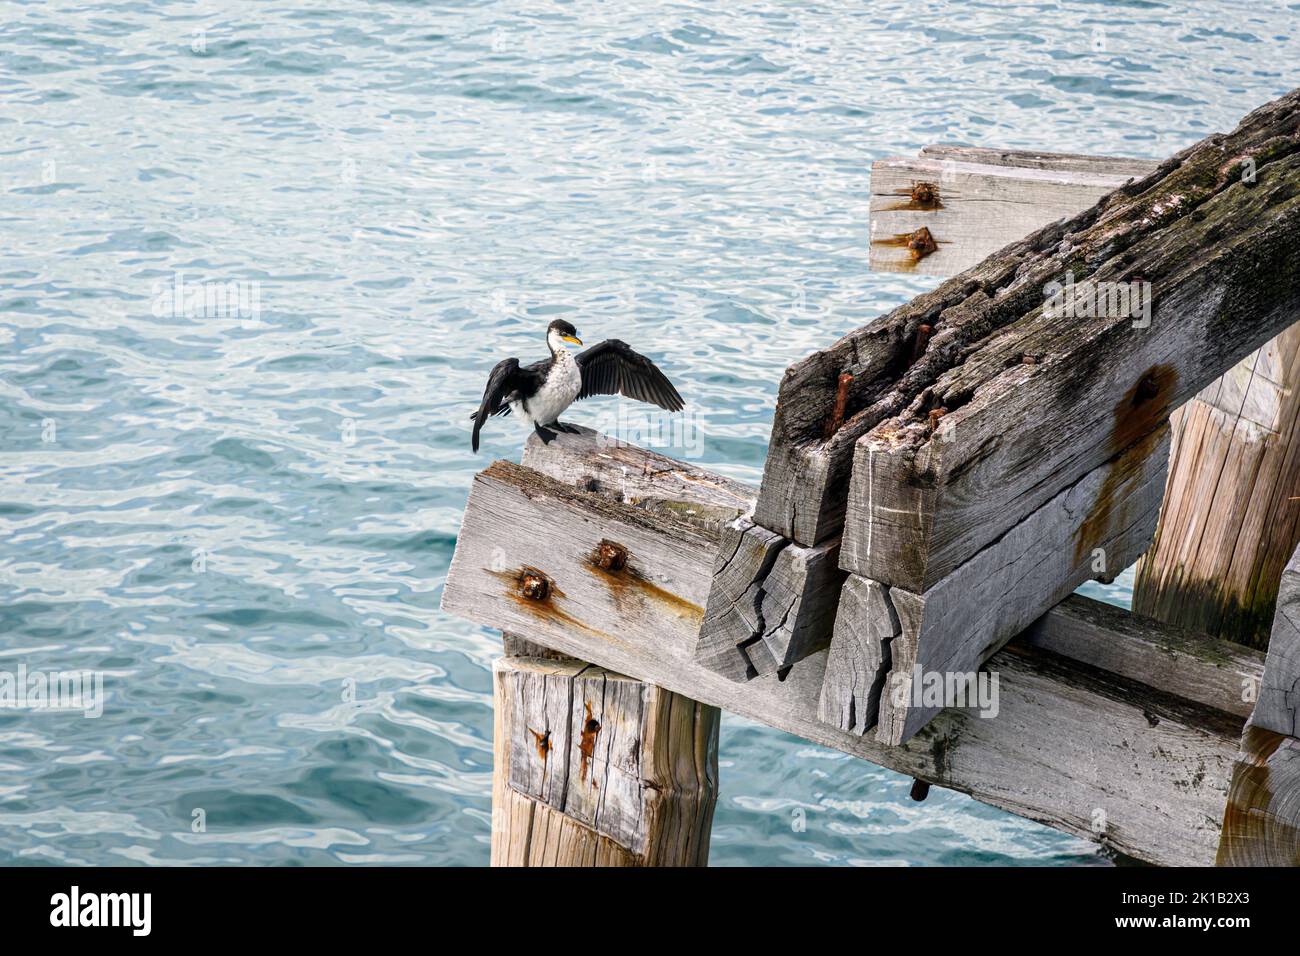 Little Pied Cormorant drying its wings on the remnants of old Busselton, Western Australia, Australia Stock Photo